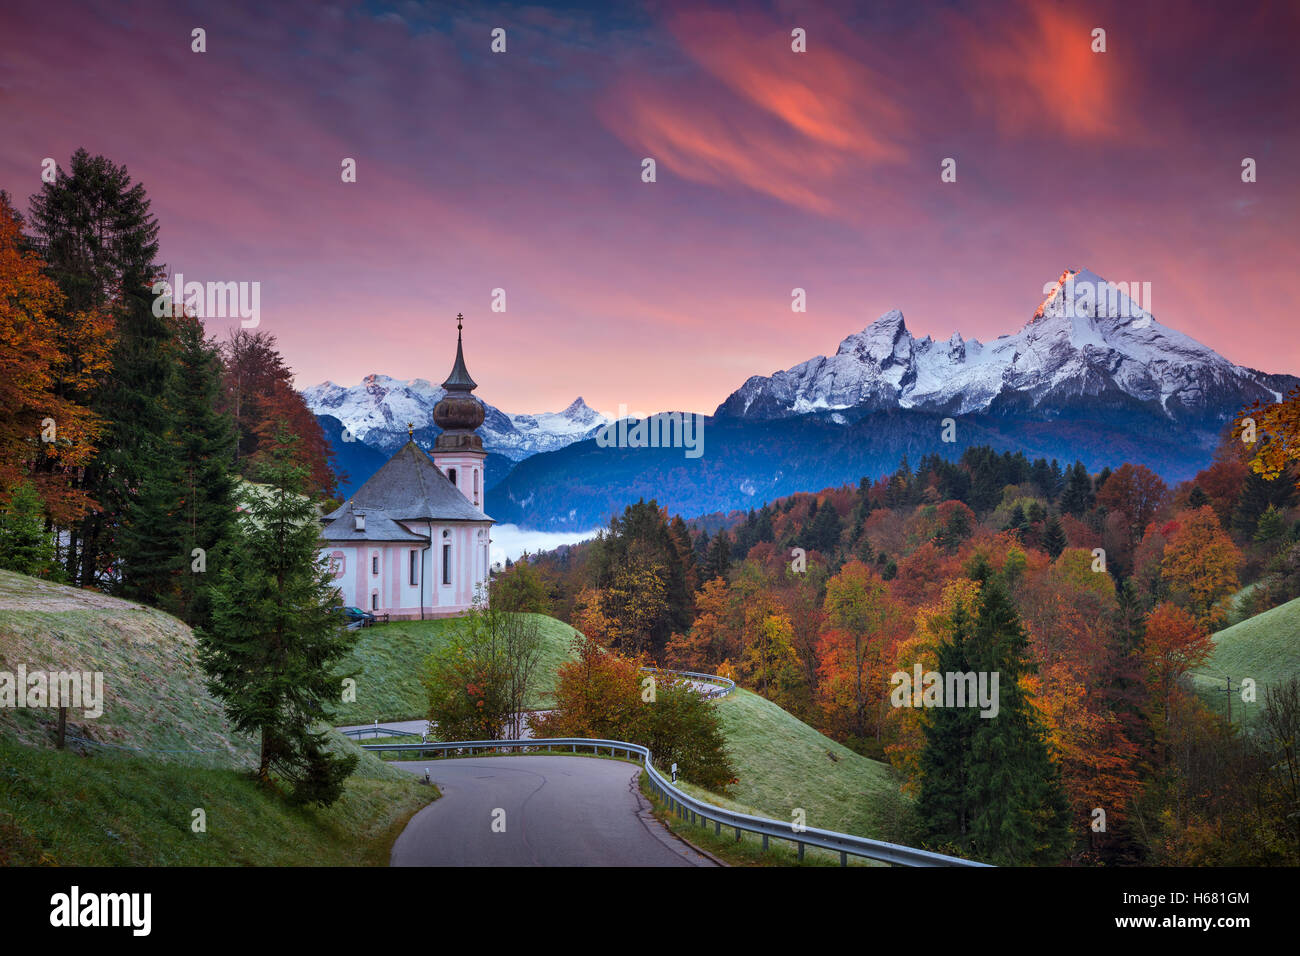 Autumn in Alps. Image of  the European Alps with Maria Gern Church during beautiful autumn sunrise. Stock Photo